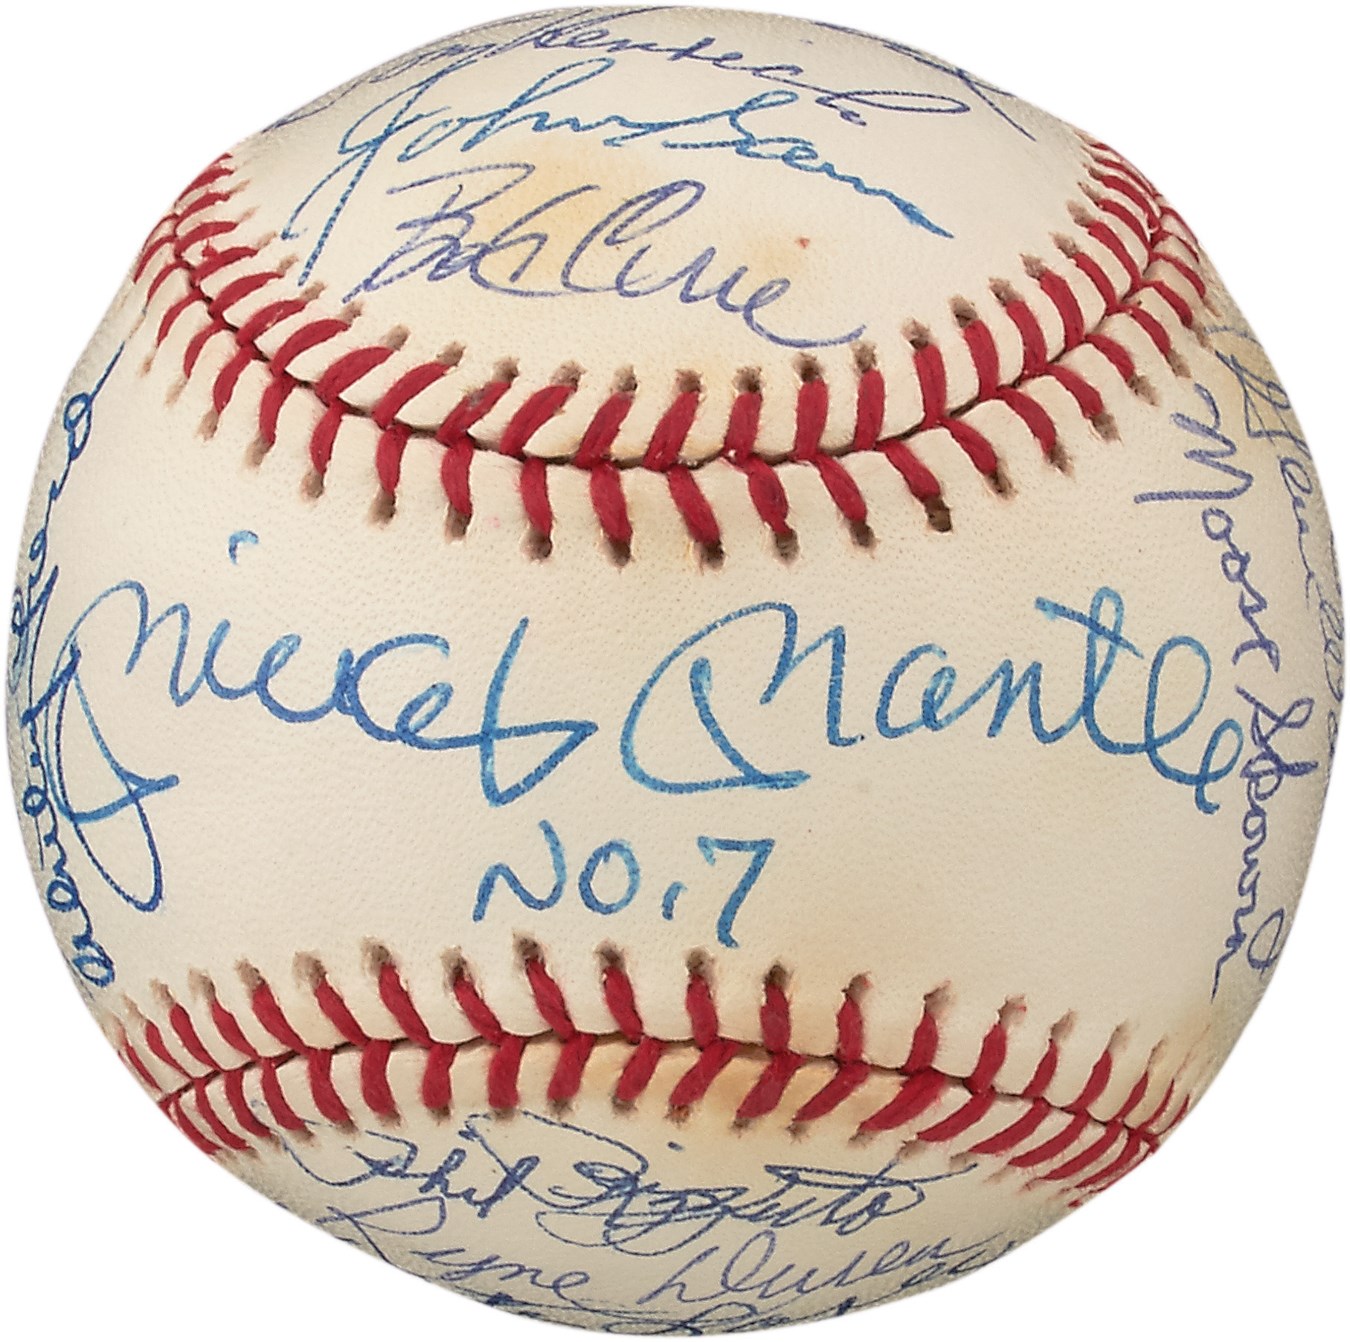 NY Yankees, Giants & Mets - 1950s New York Yankee World Series Champions Signed Baseball - Mickey Mantle No. 7 on Sweet Spot